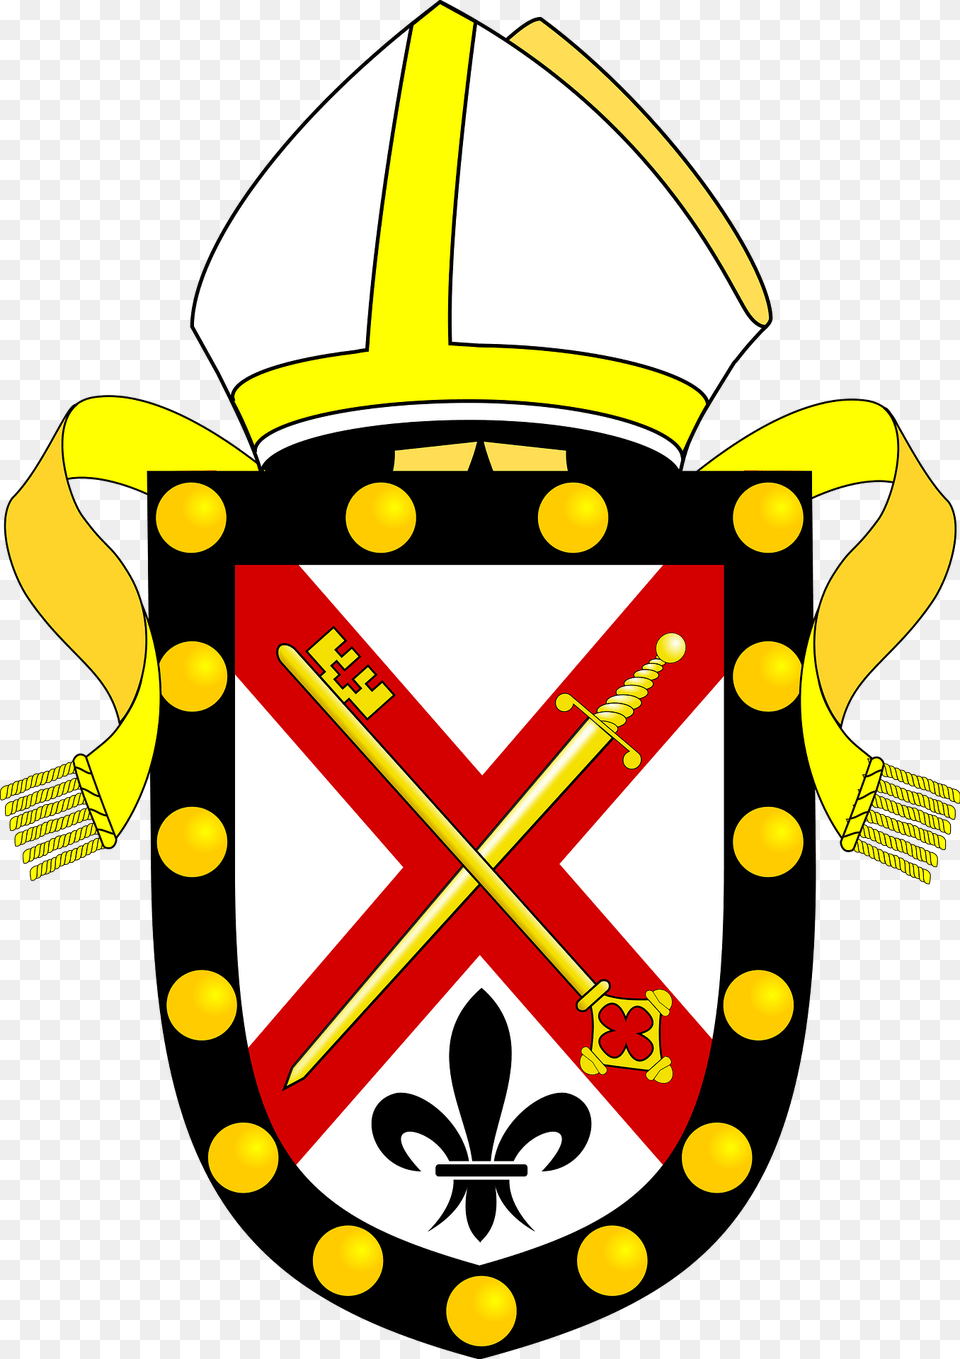 Diocese Of Truro Arms Clipart, Armor, Shield, Dynamite, Weapon Free Png Download